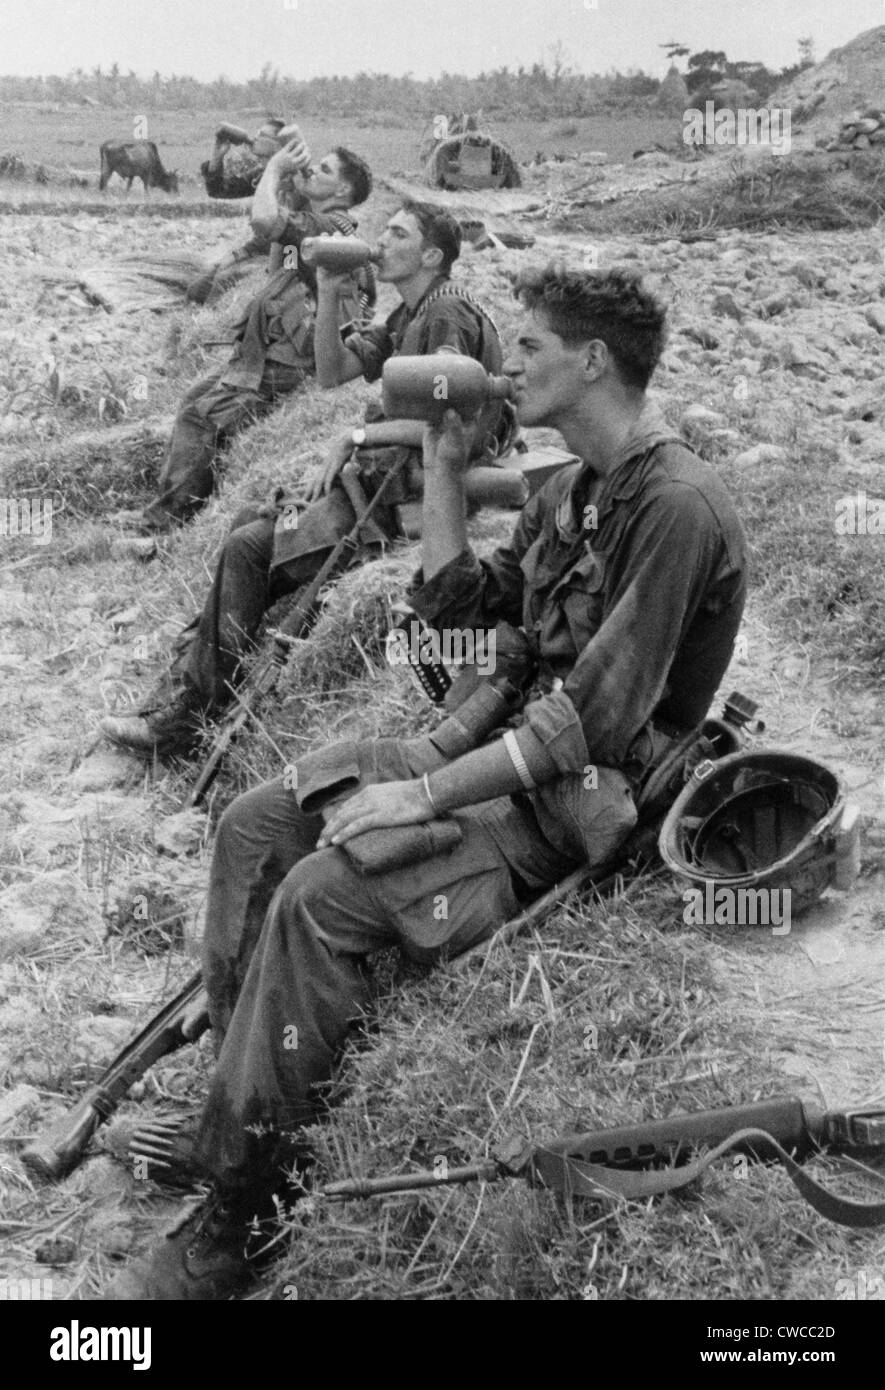 Vietnam War. Soldiers of the 25th Infantry Division drink from their canteens during a break in their patrol operations in Duc Stock Photo